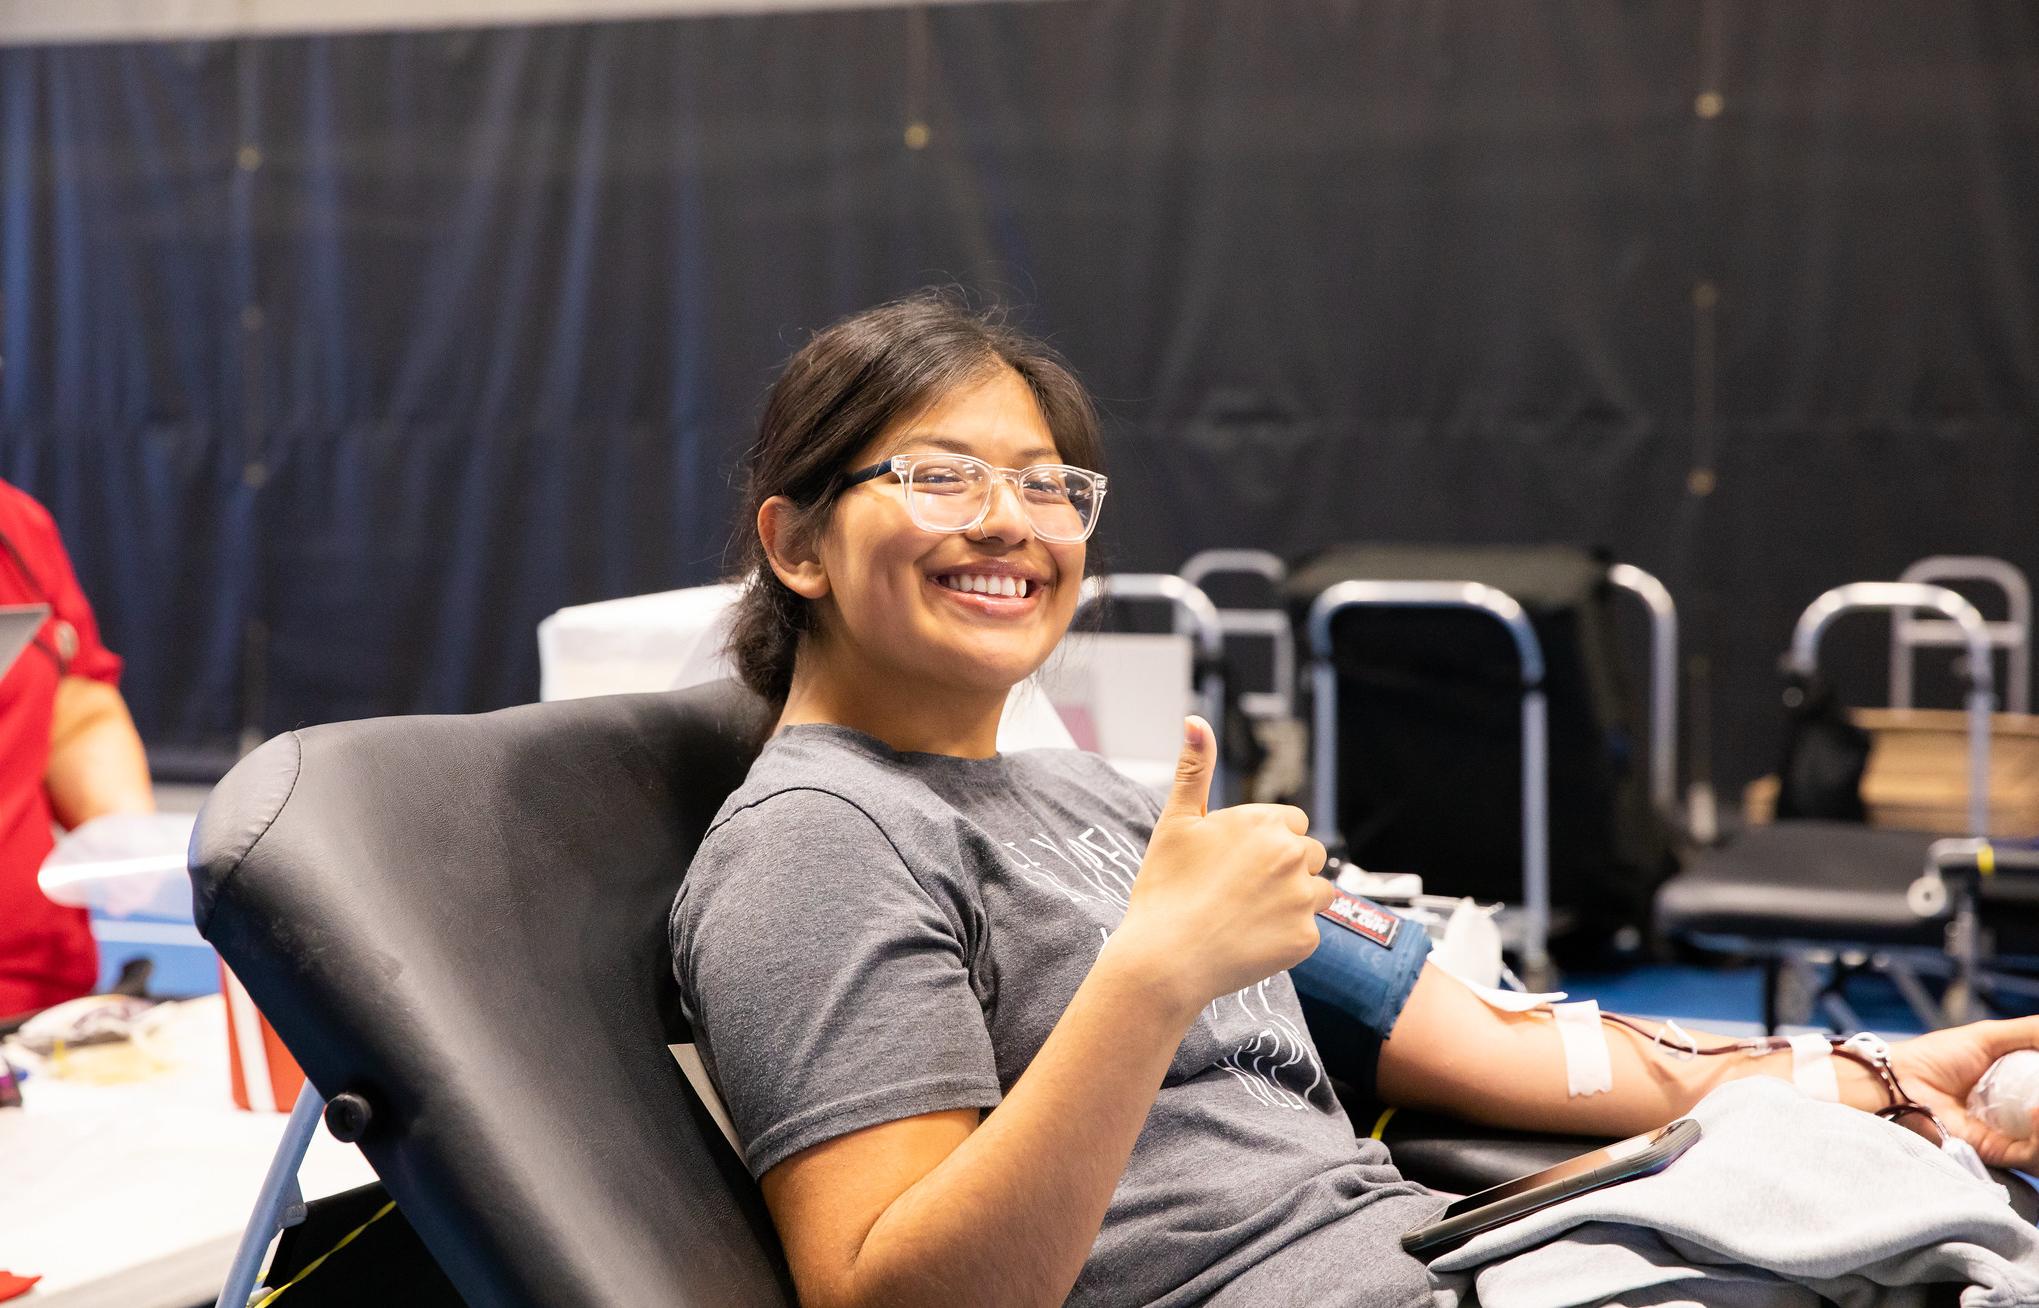 a student gives a thumbs up while donating blood